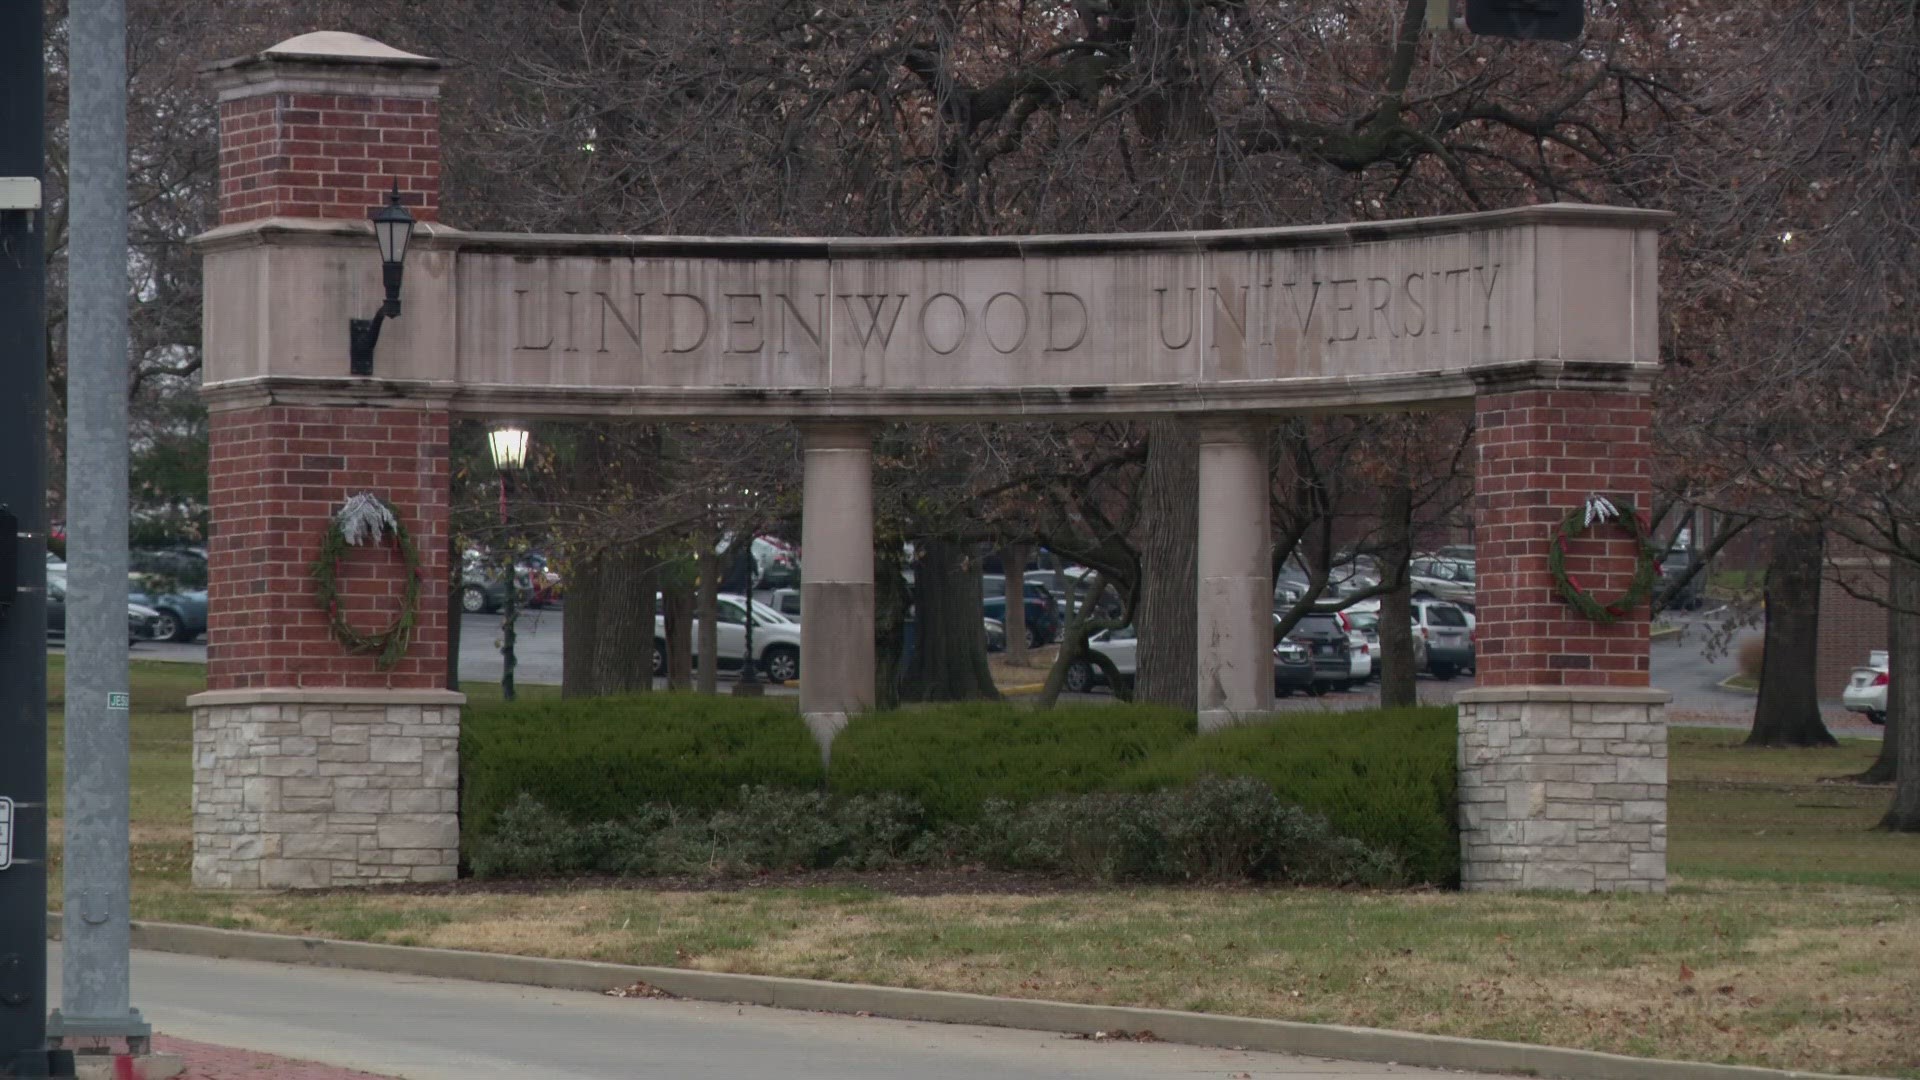 Lindenwood University announced Friday it will cut 10 of its athletic teams, including nine Division I programs. Student-athletes speak out about the decision.